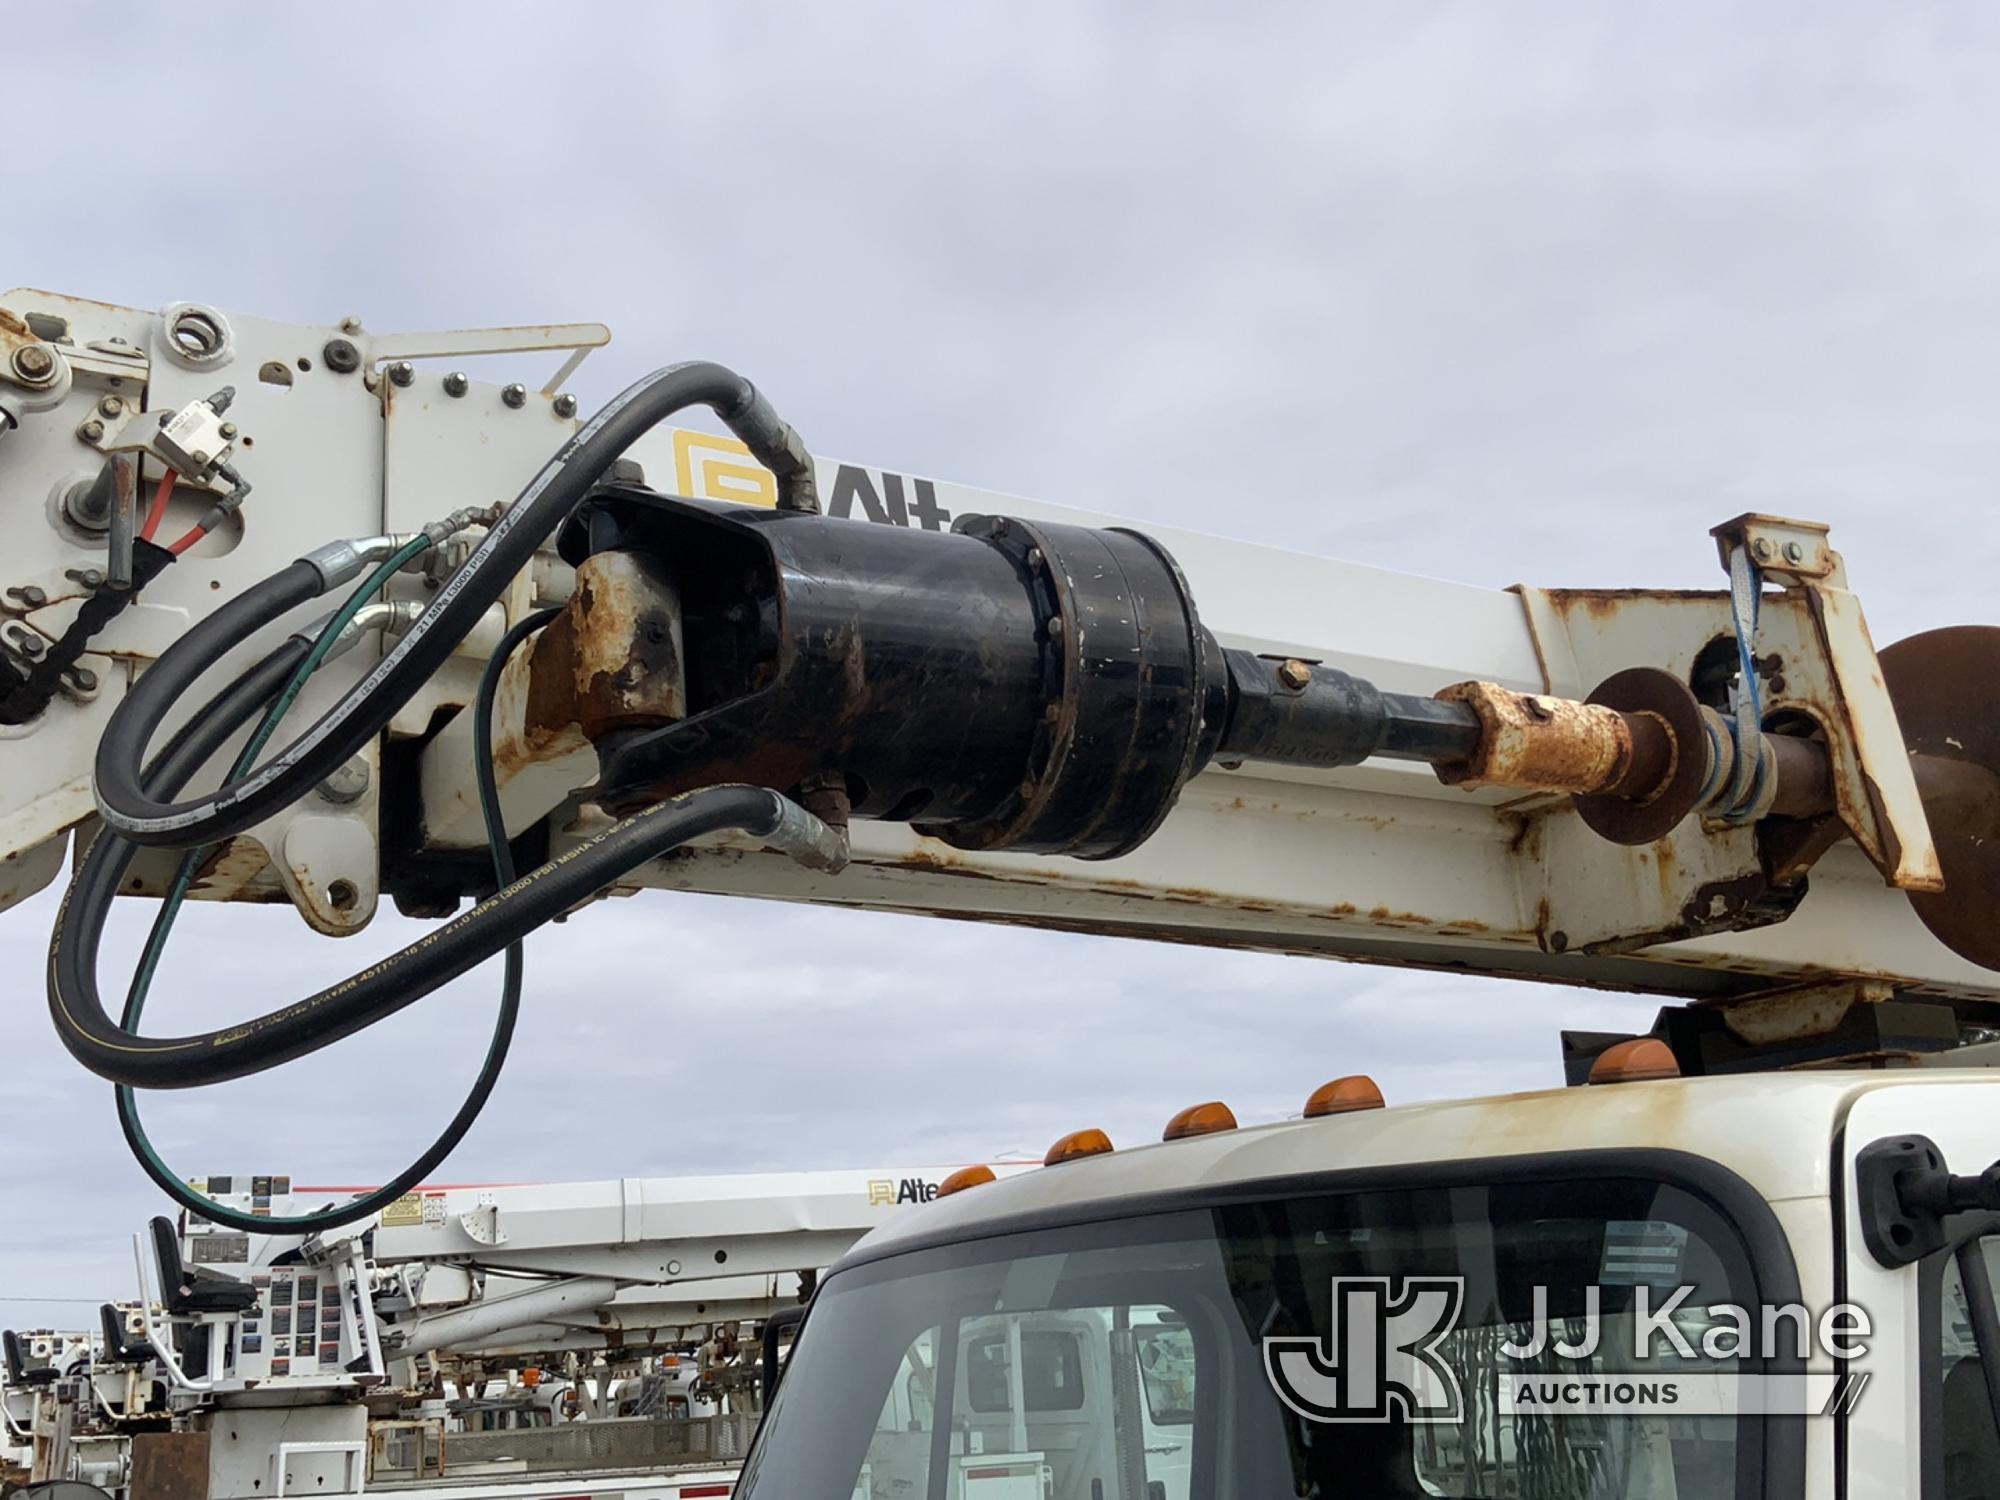 (South Beloit, IL) Altec DC47-TR, Digger Derrick rear mounted on 2018 Freightliner M2 106 Utility Tr